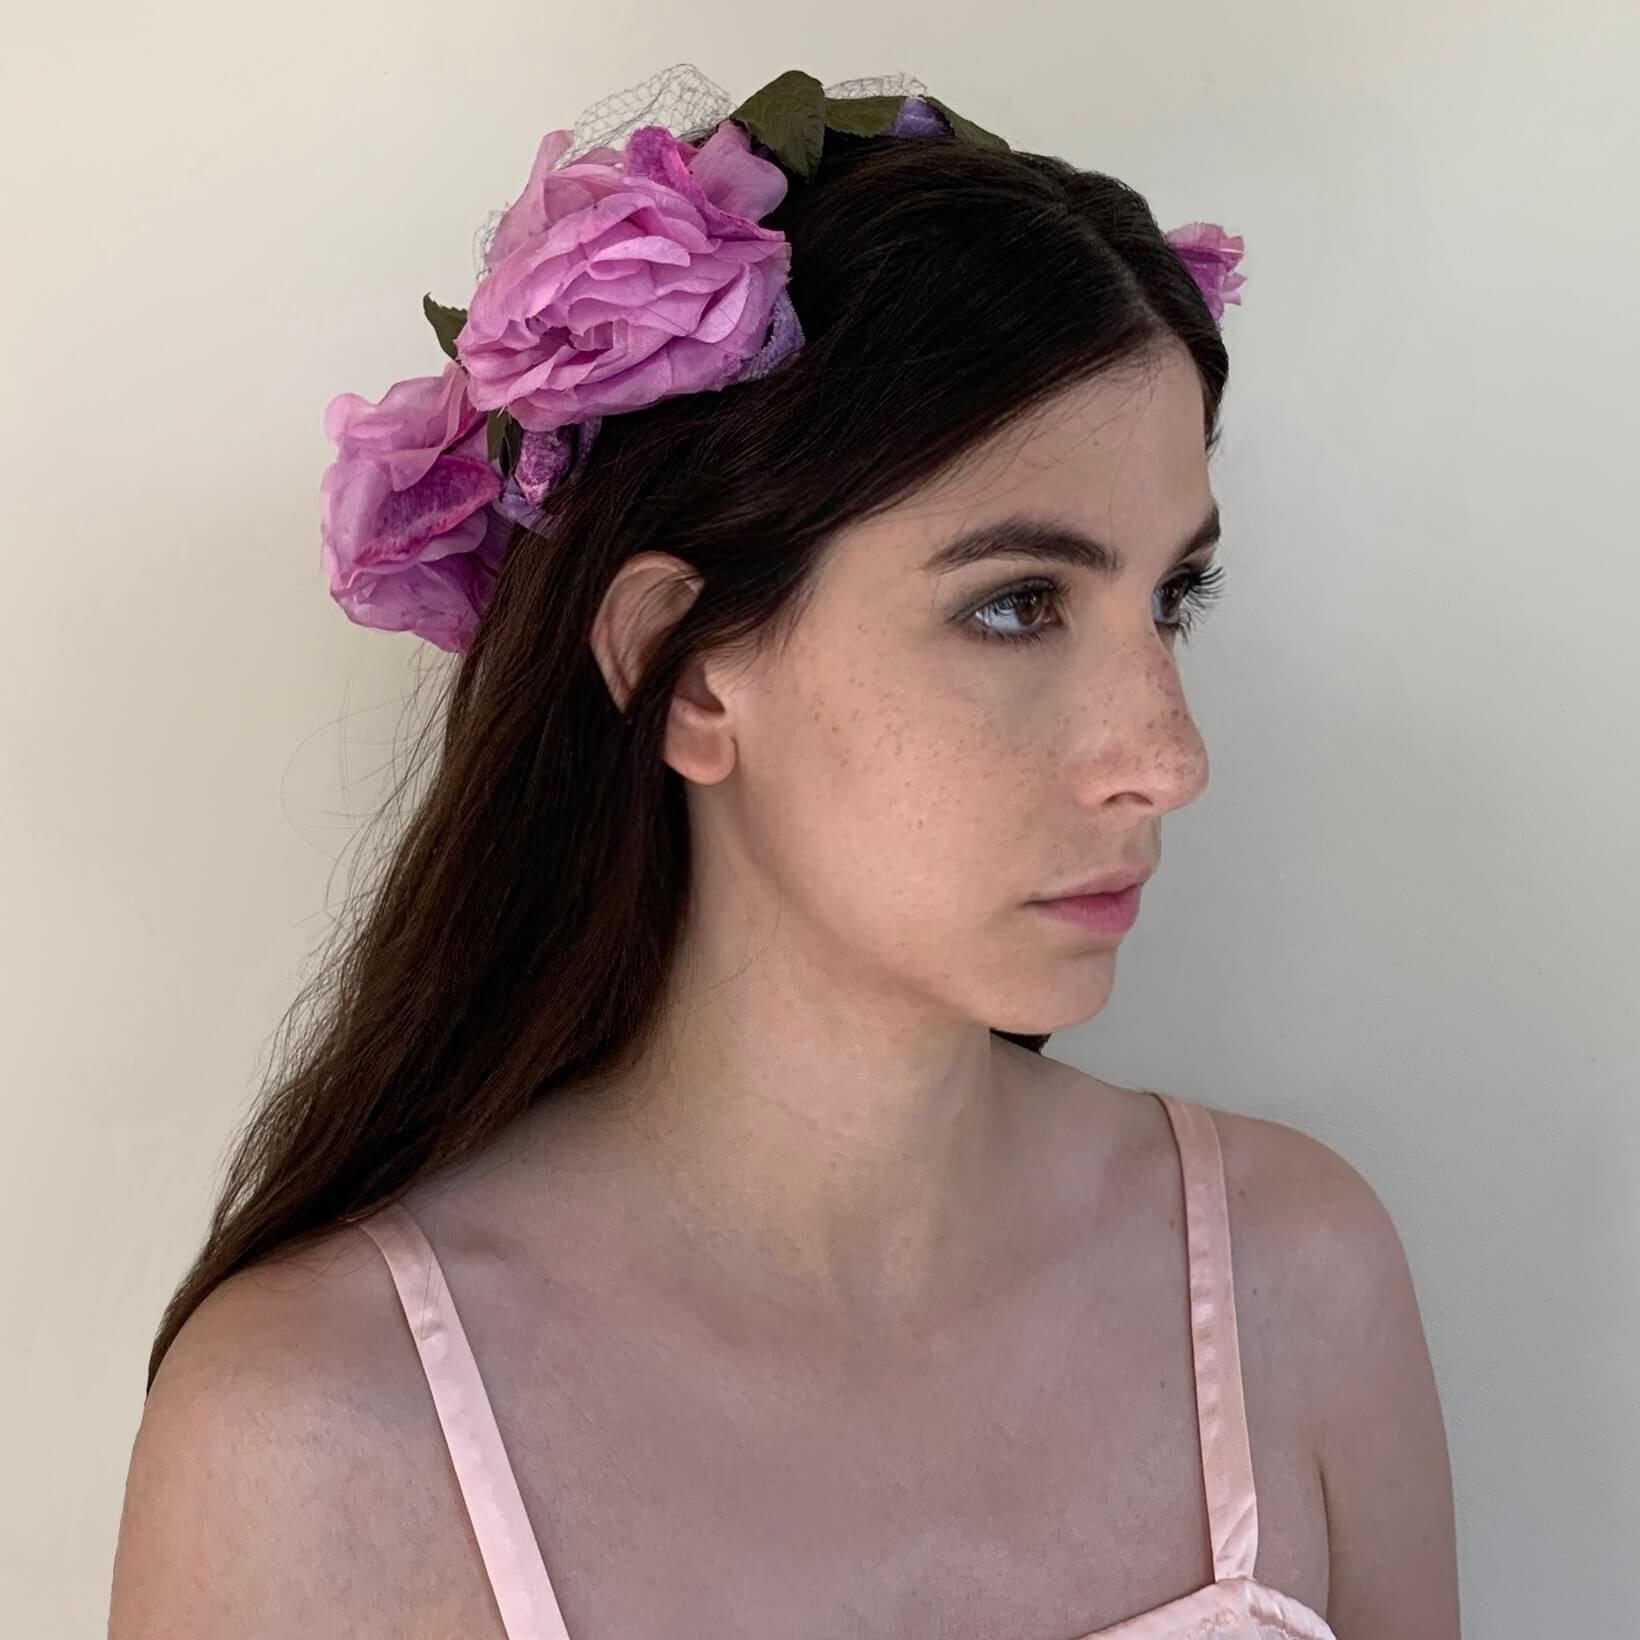 side view showing the purple peonies on the headpiece